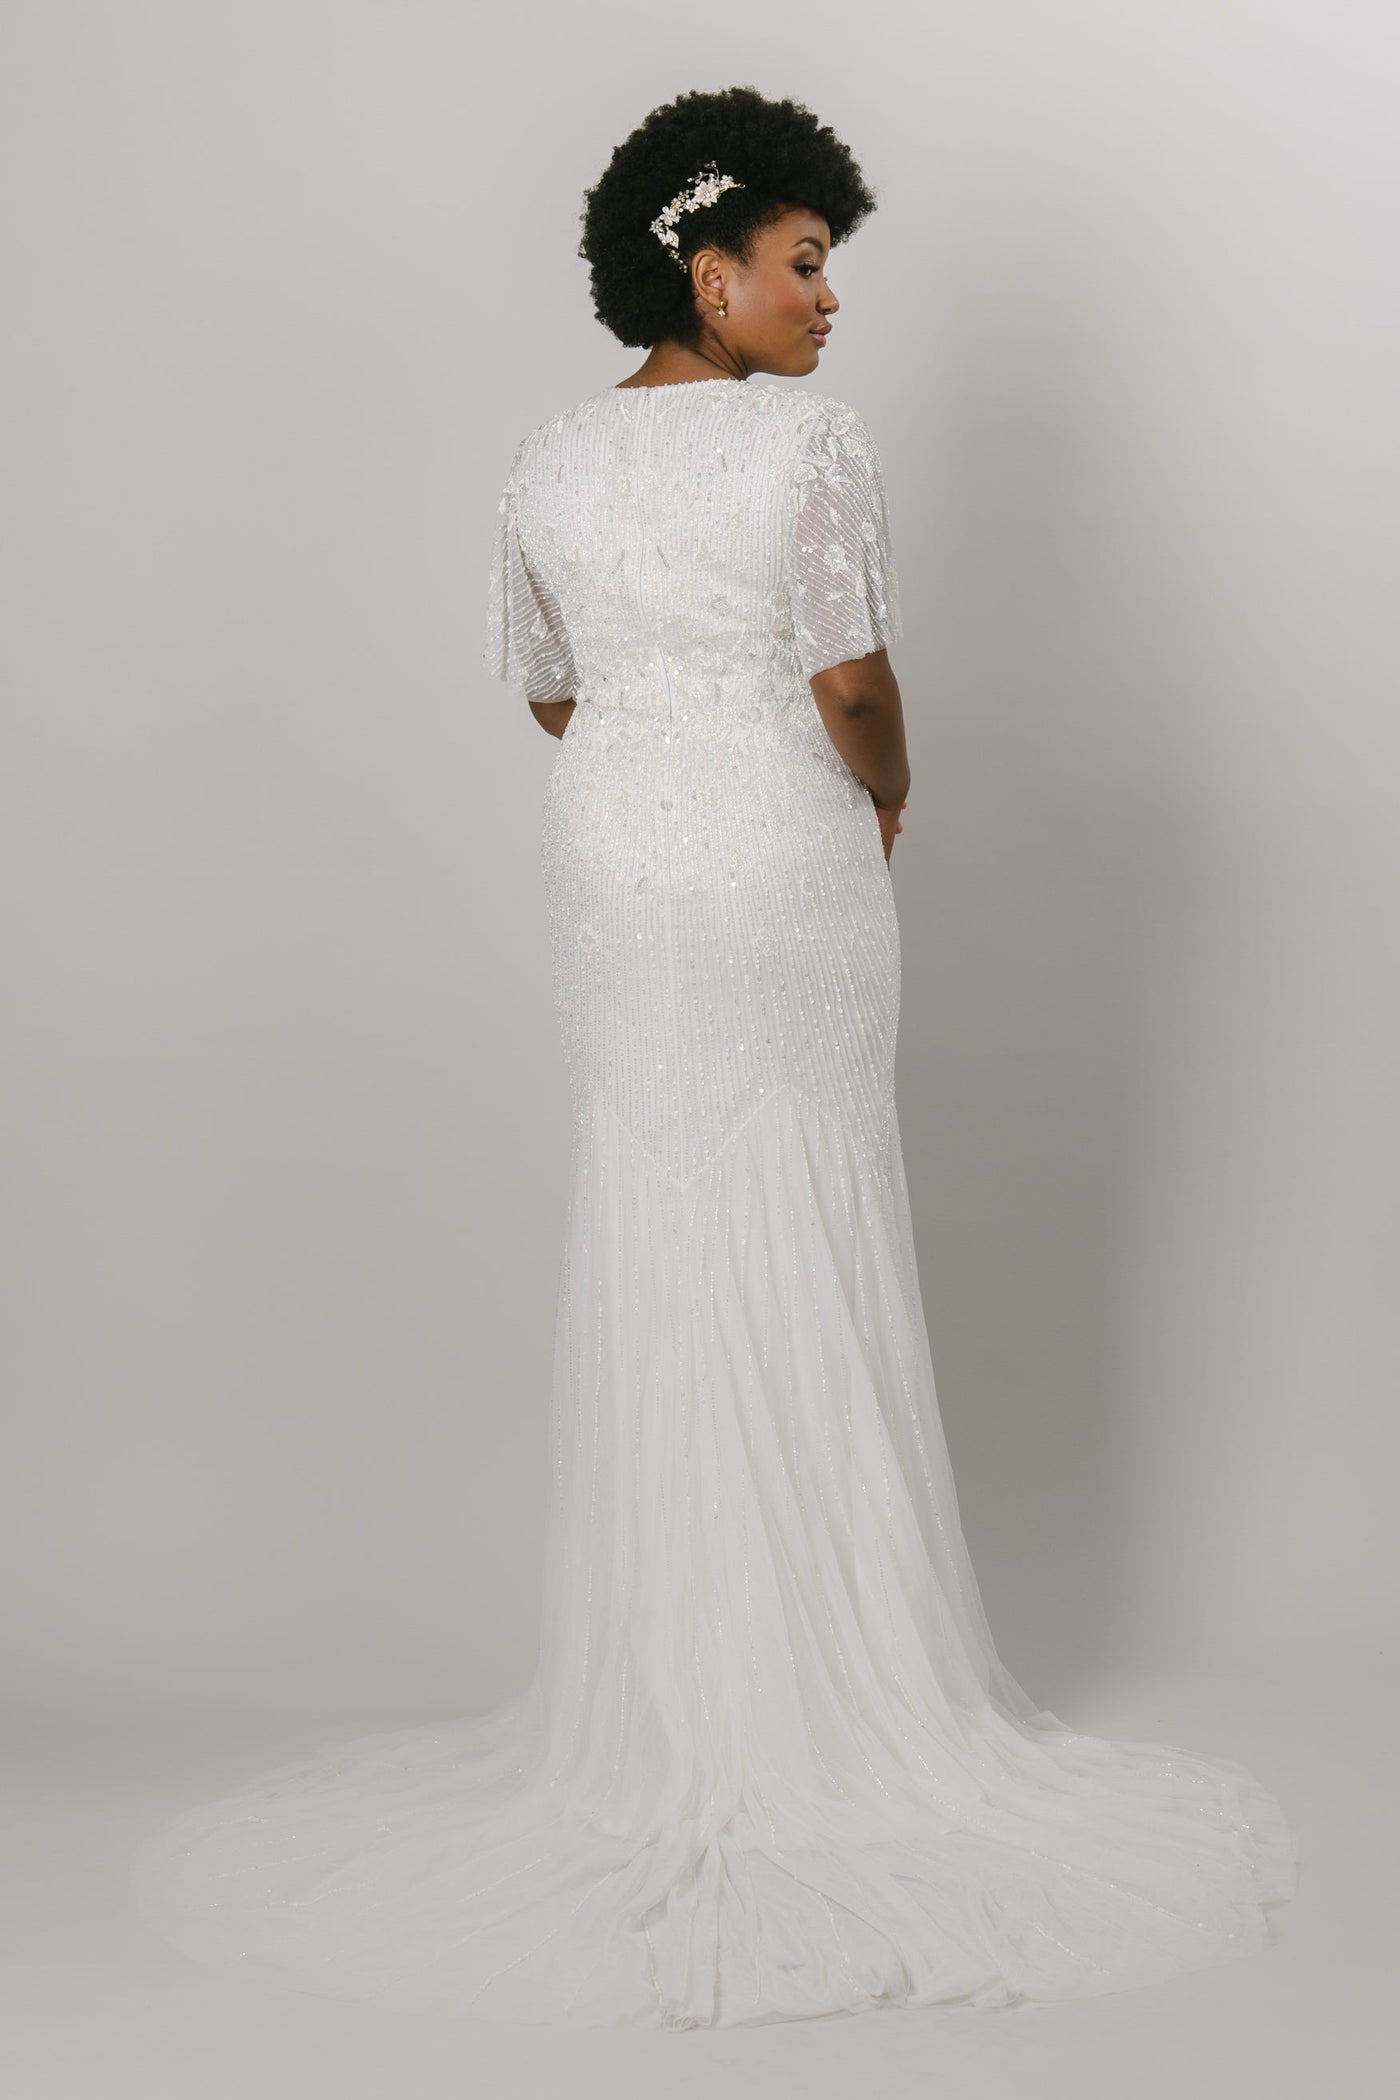 This fully jeweled modest wedding gown features a delicate flutter sleeve, and soft mermaid silhouette. Available in ivory.